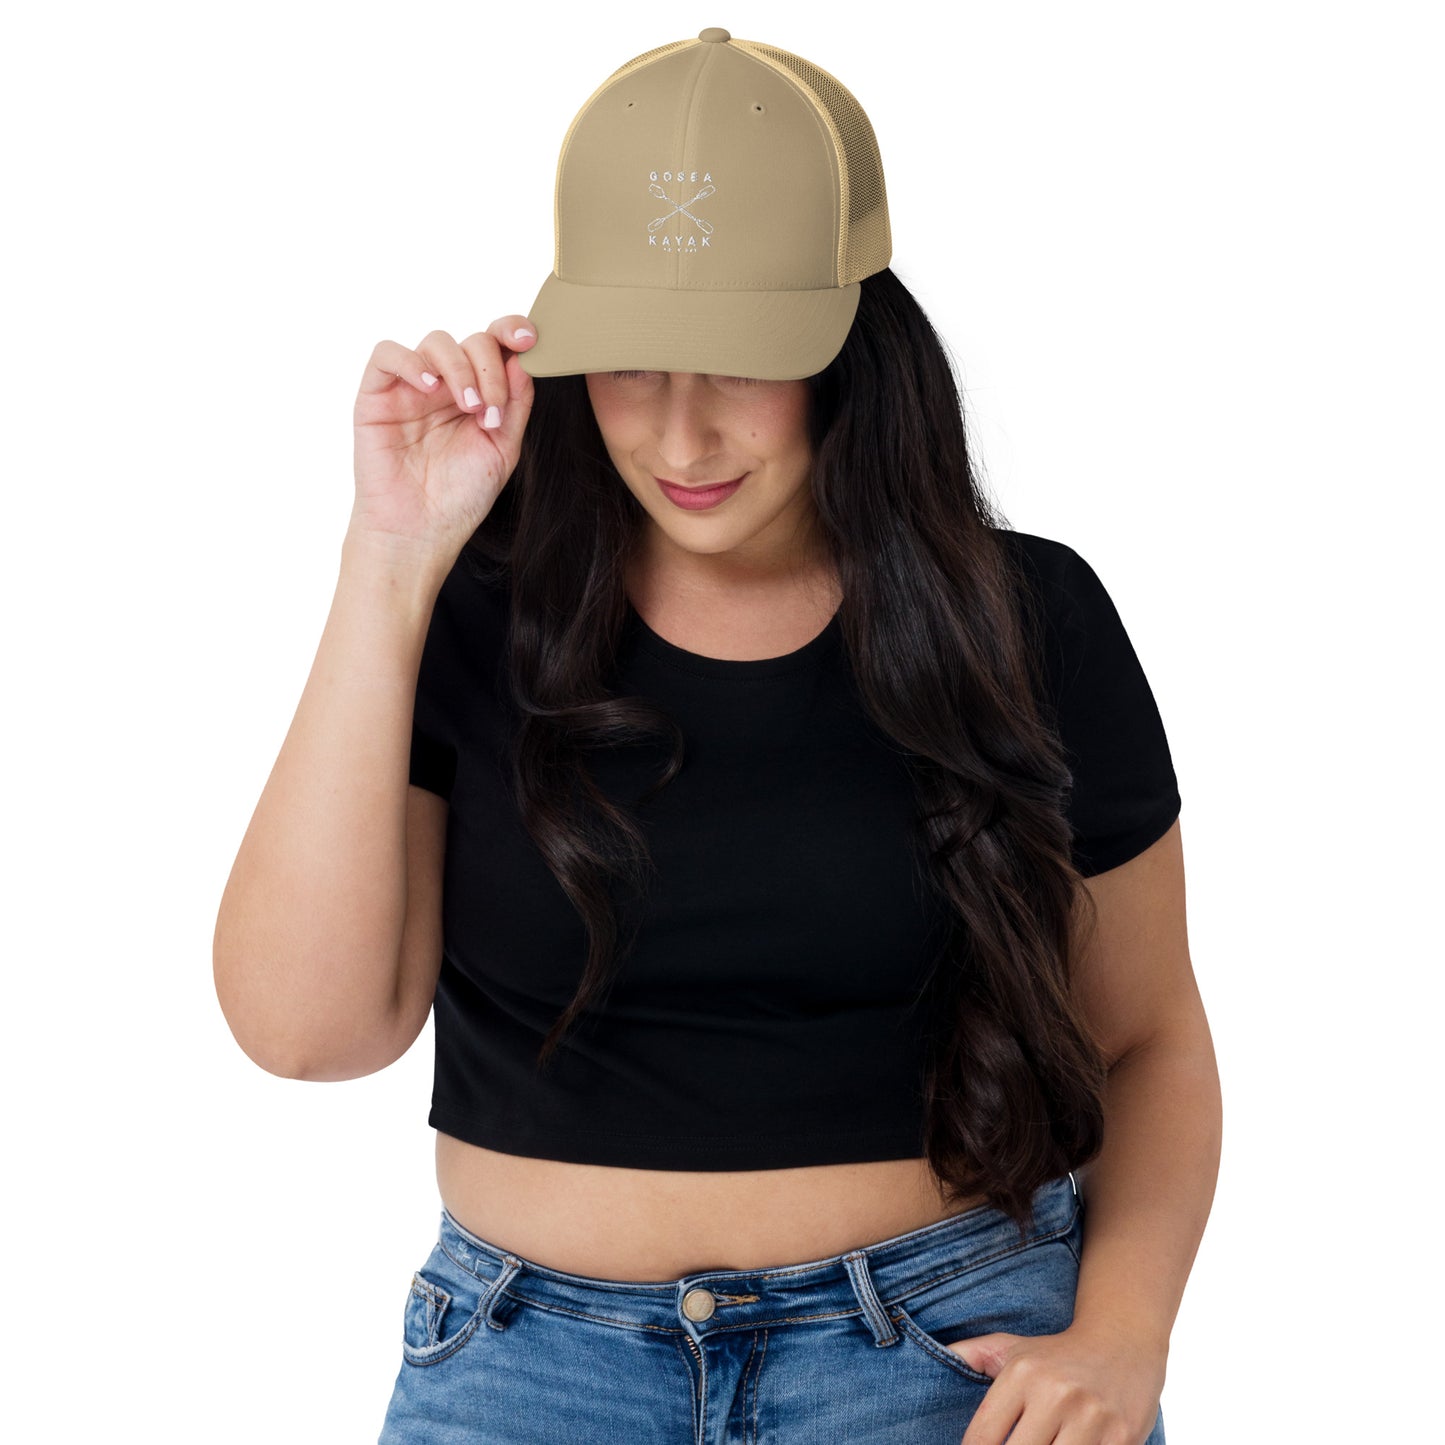  Trucker Cap - Khaki - front view being warn by woman with her head down and hand holding the brim - Crossed Paddles Go Sea Kayak Crew logo in white on front - Genuine Byron Bay Merchandise | Produced by Go Sea Kayak Byron Bay 